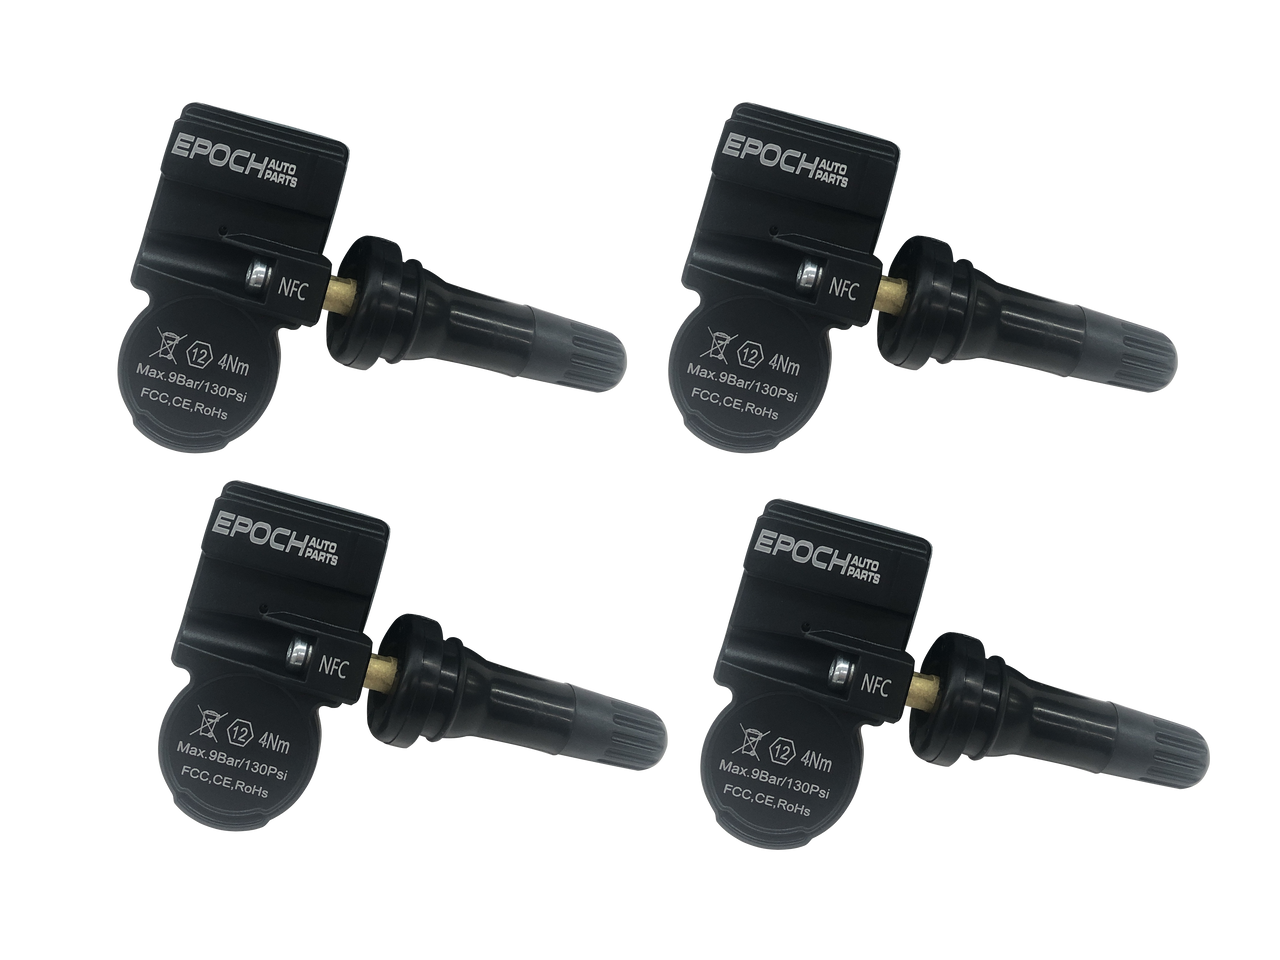 Set 4 TPMS Tire Pressure Sensors 433Mhz Rubber fits 02-03 Chrysler Town & Country